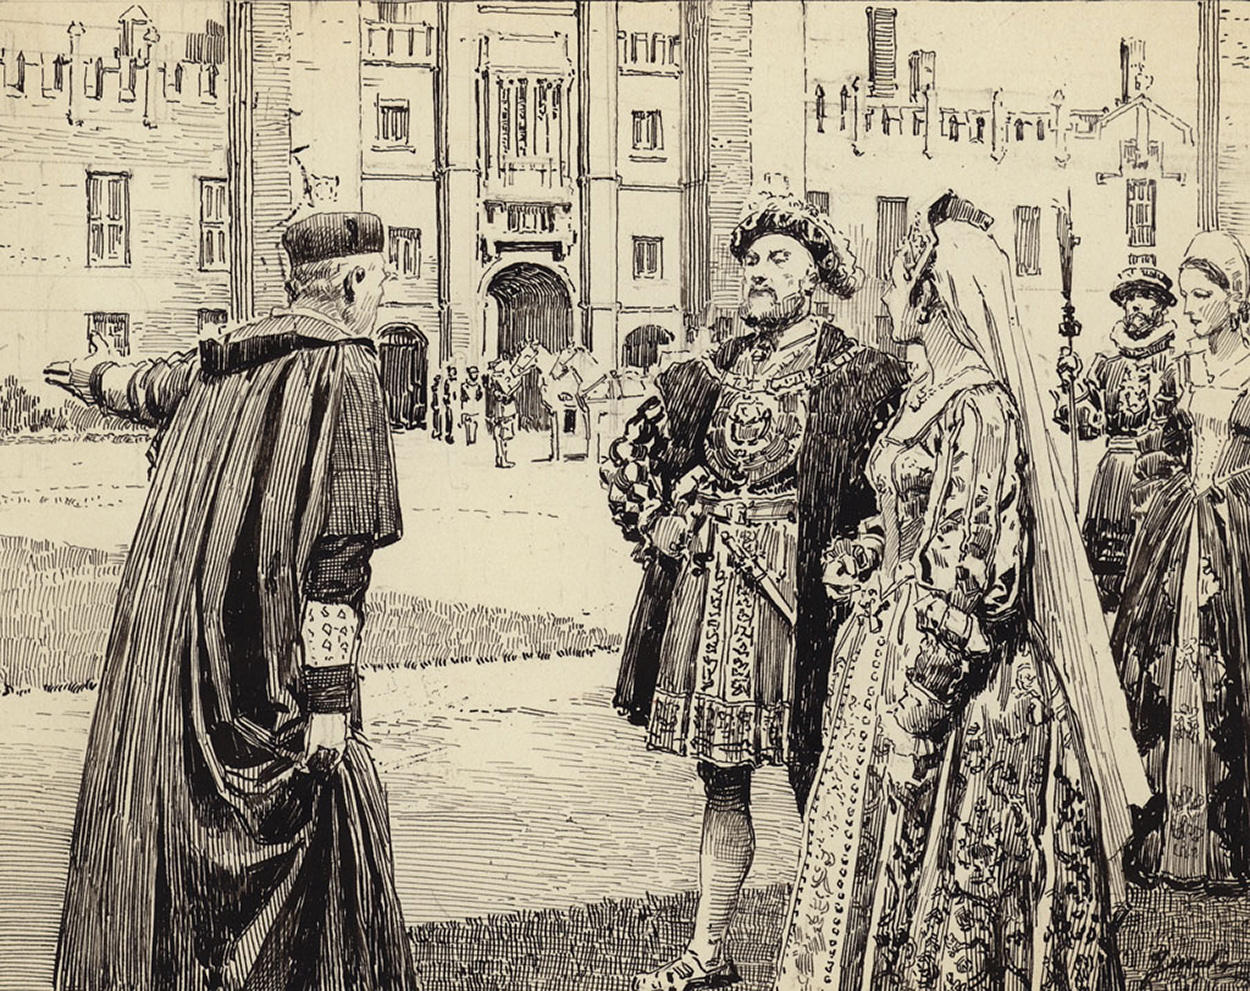 Henry VIII at Hampton Court (Original) (Signed) art by Royalty (Matania) at The Illustration Art Gallery